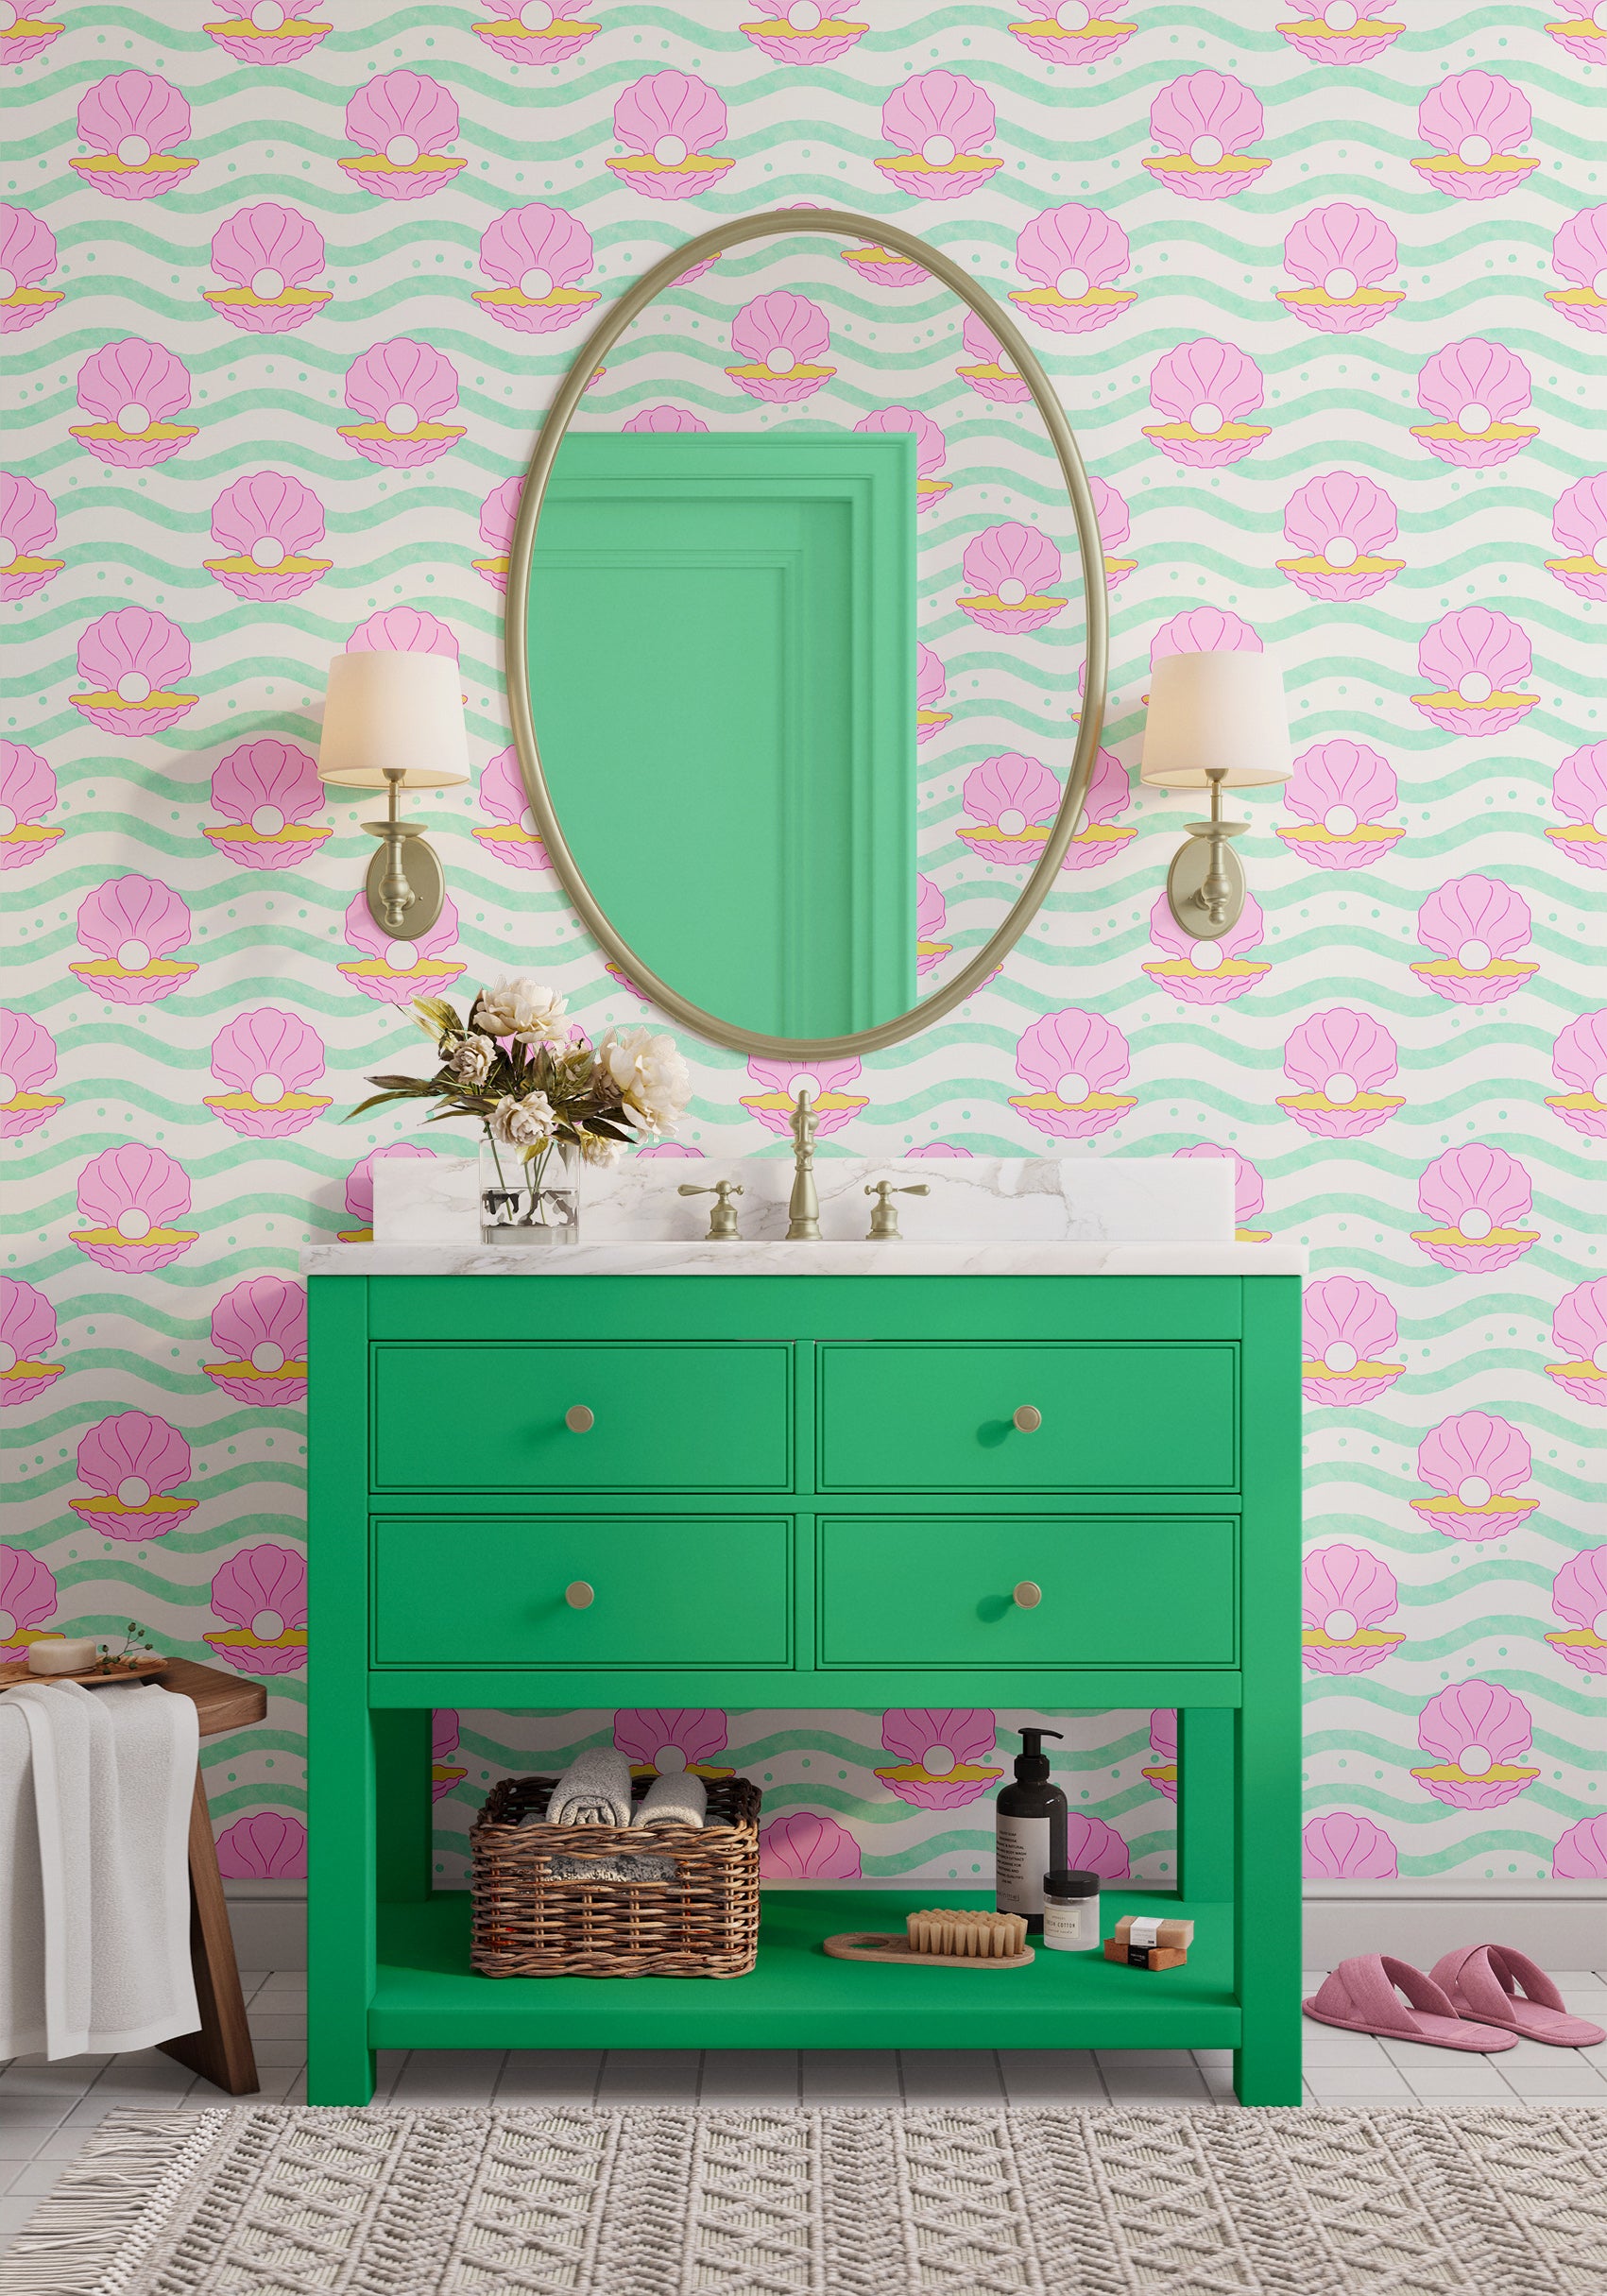 bathroom wallpaper with shells in green, pink and yellow